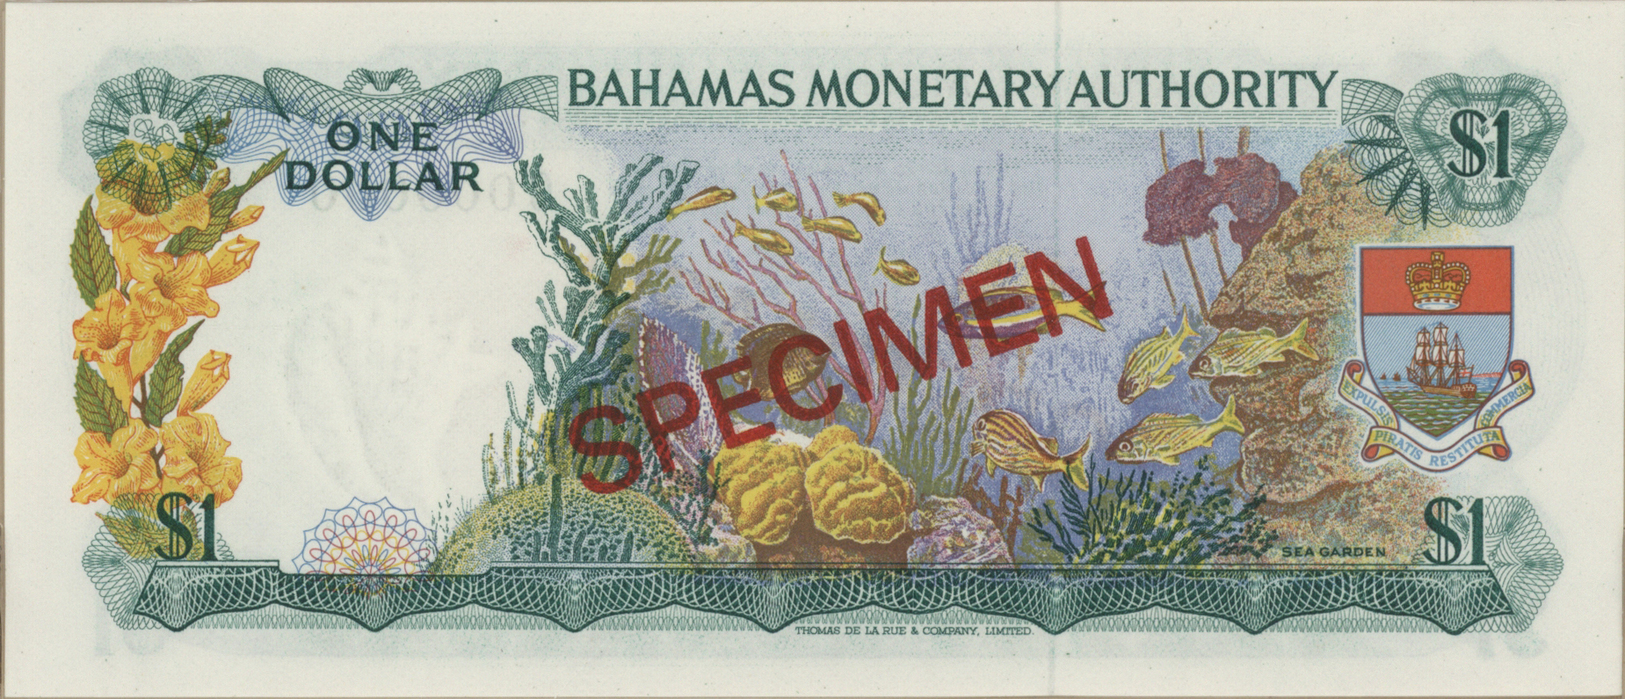 00222 Bahamas: complete set of 8 Specimen notes from 1/2 to 100 Dollars P. 26s-33s without cancellation holes, zero seri